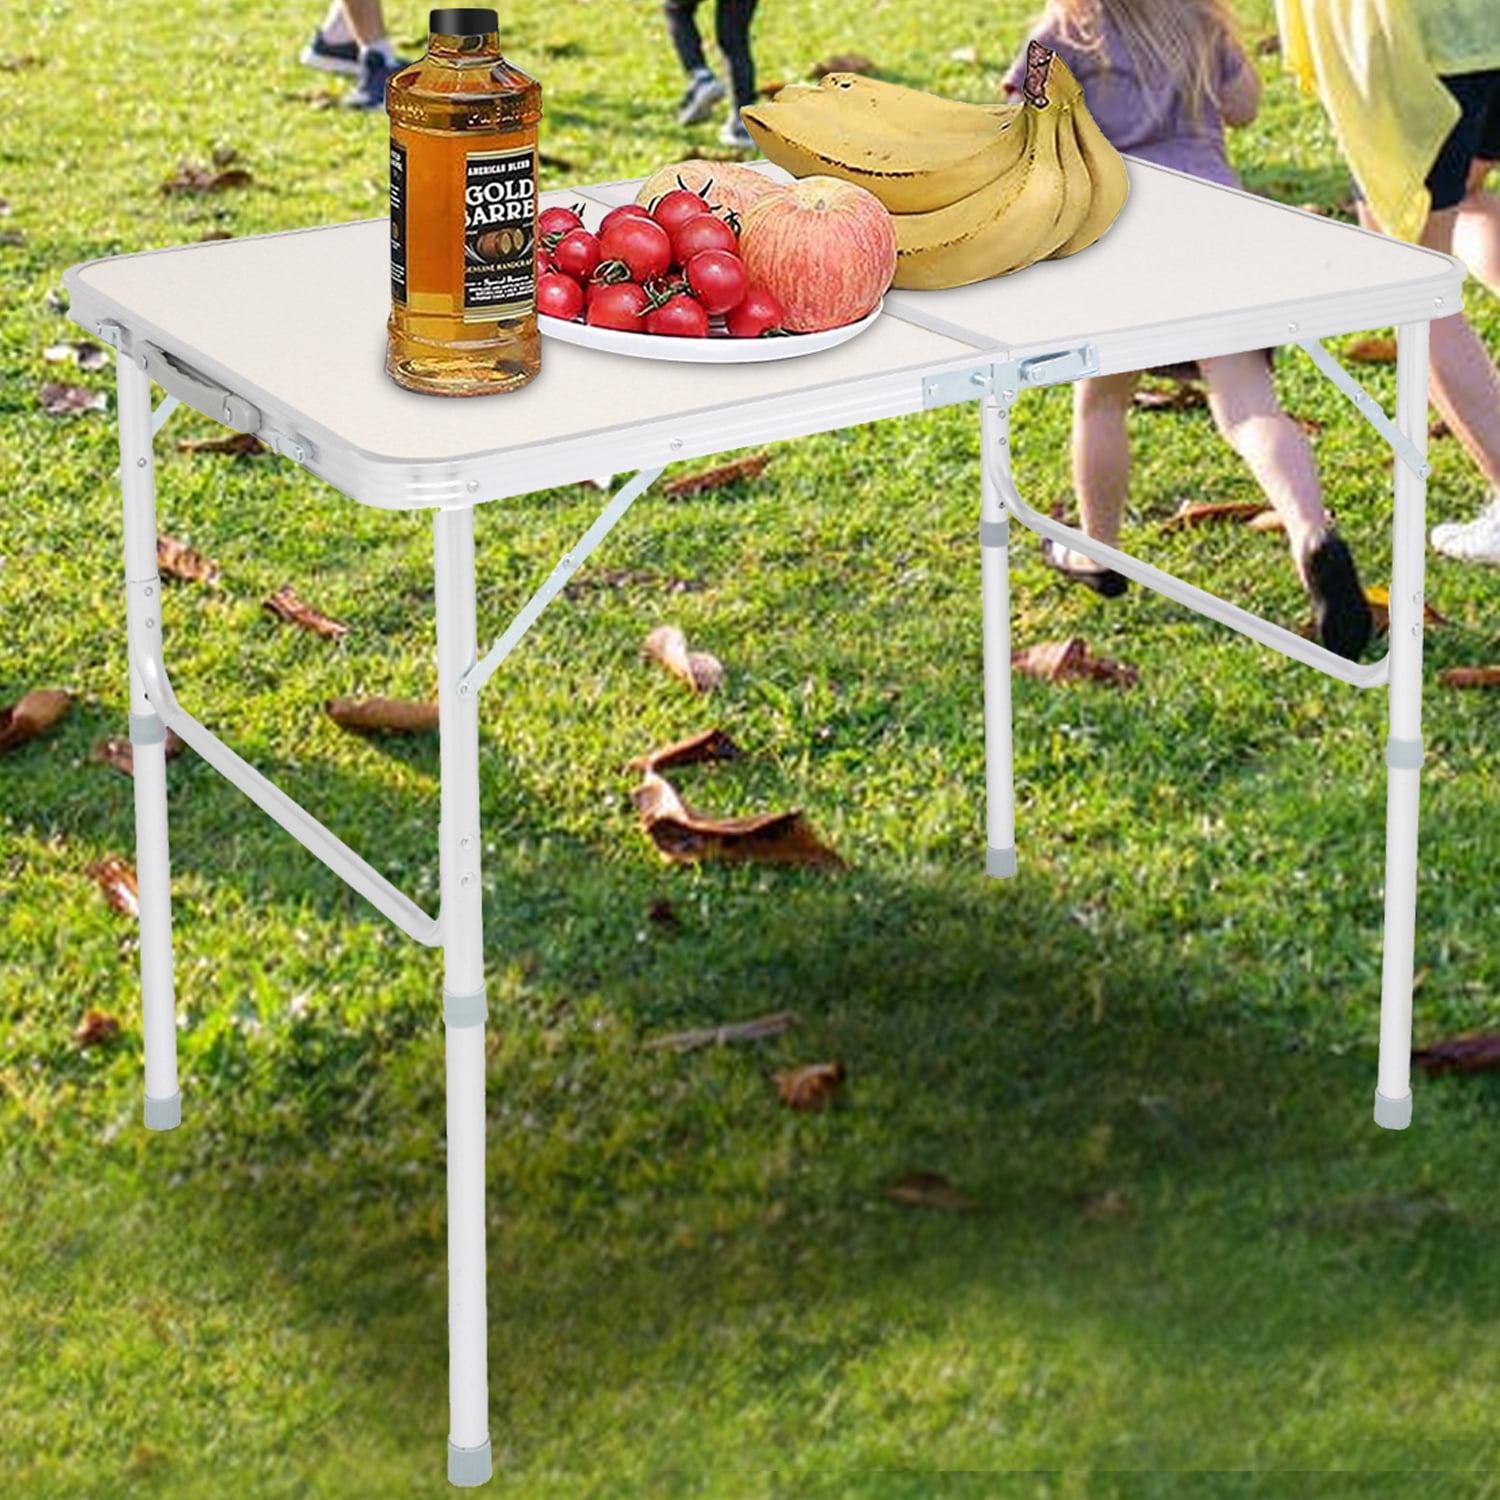 70cm Folding Camping Table Small Lightweight Portable Outdoor Picnic Caravan BBQ 